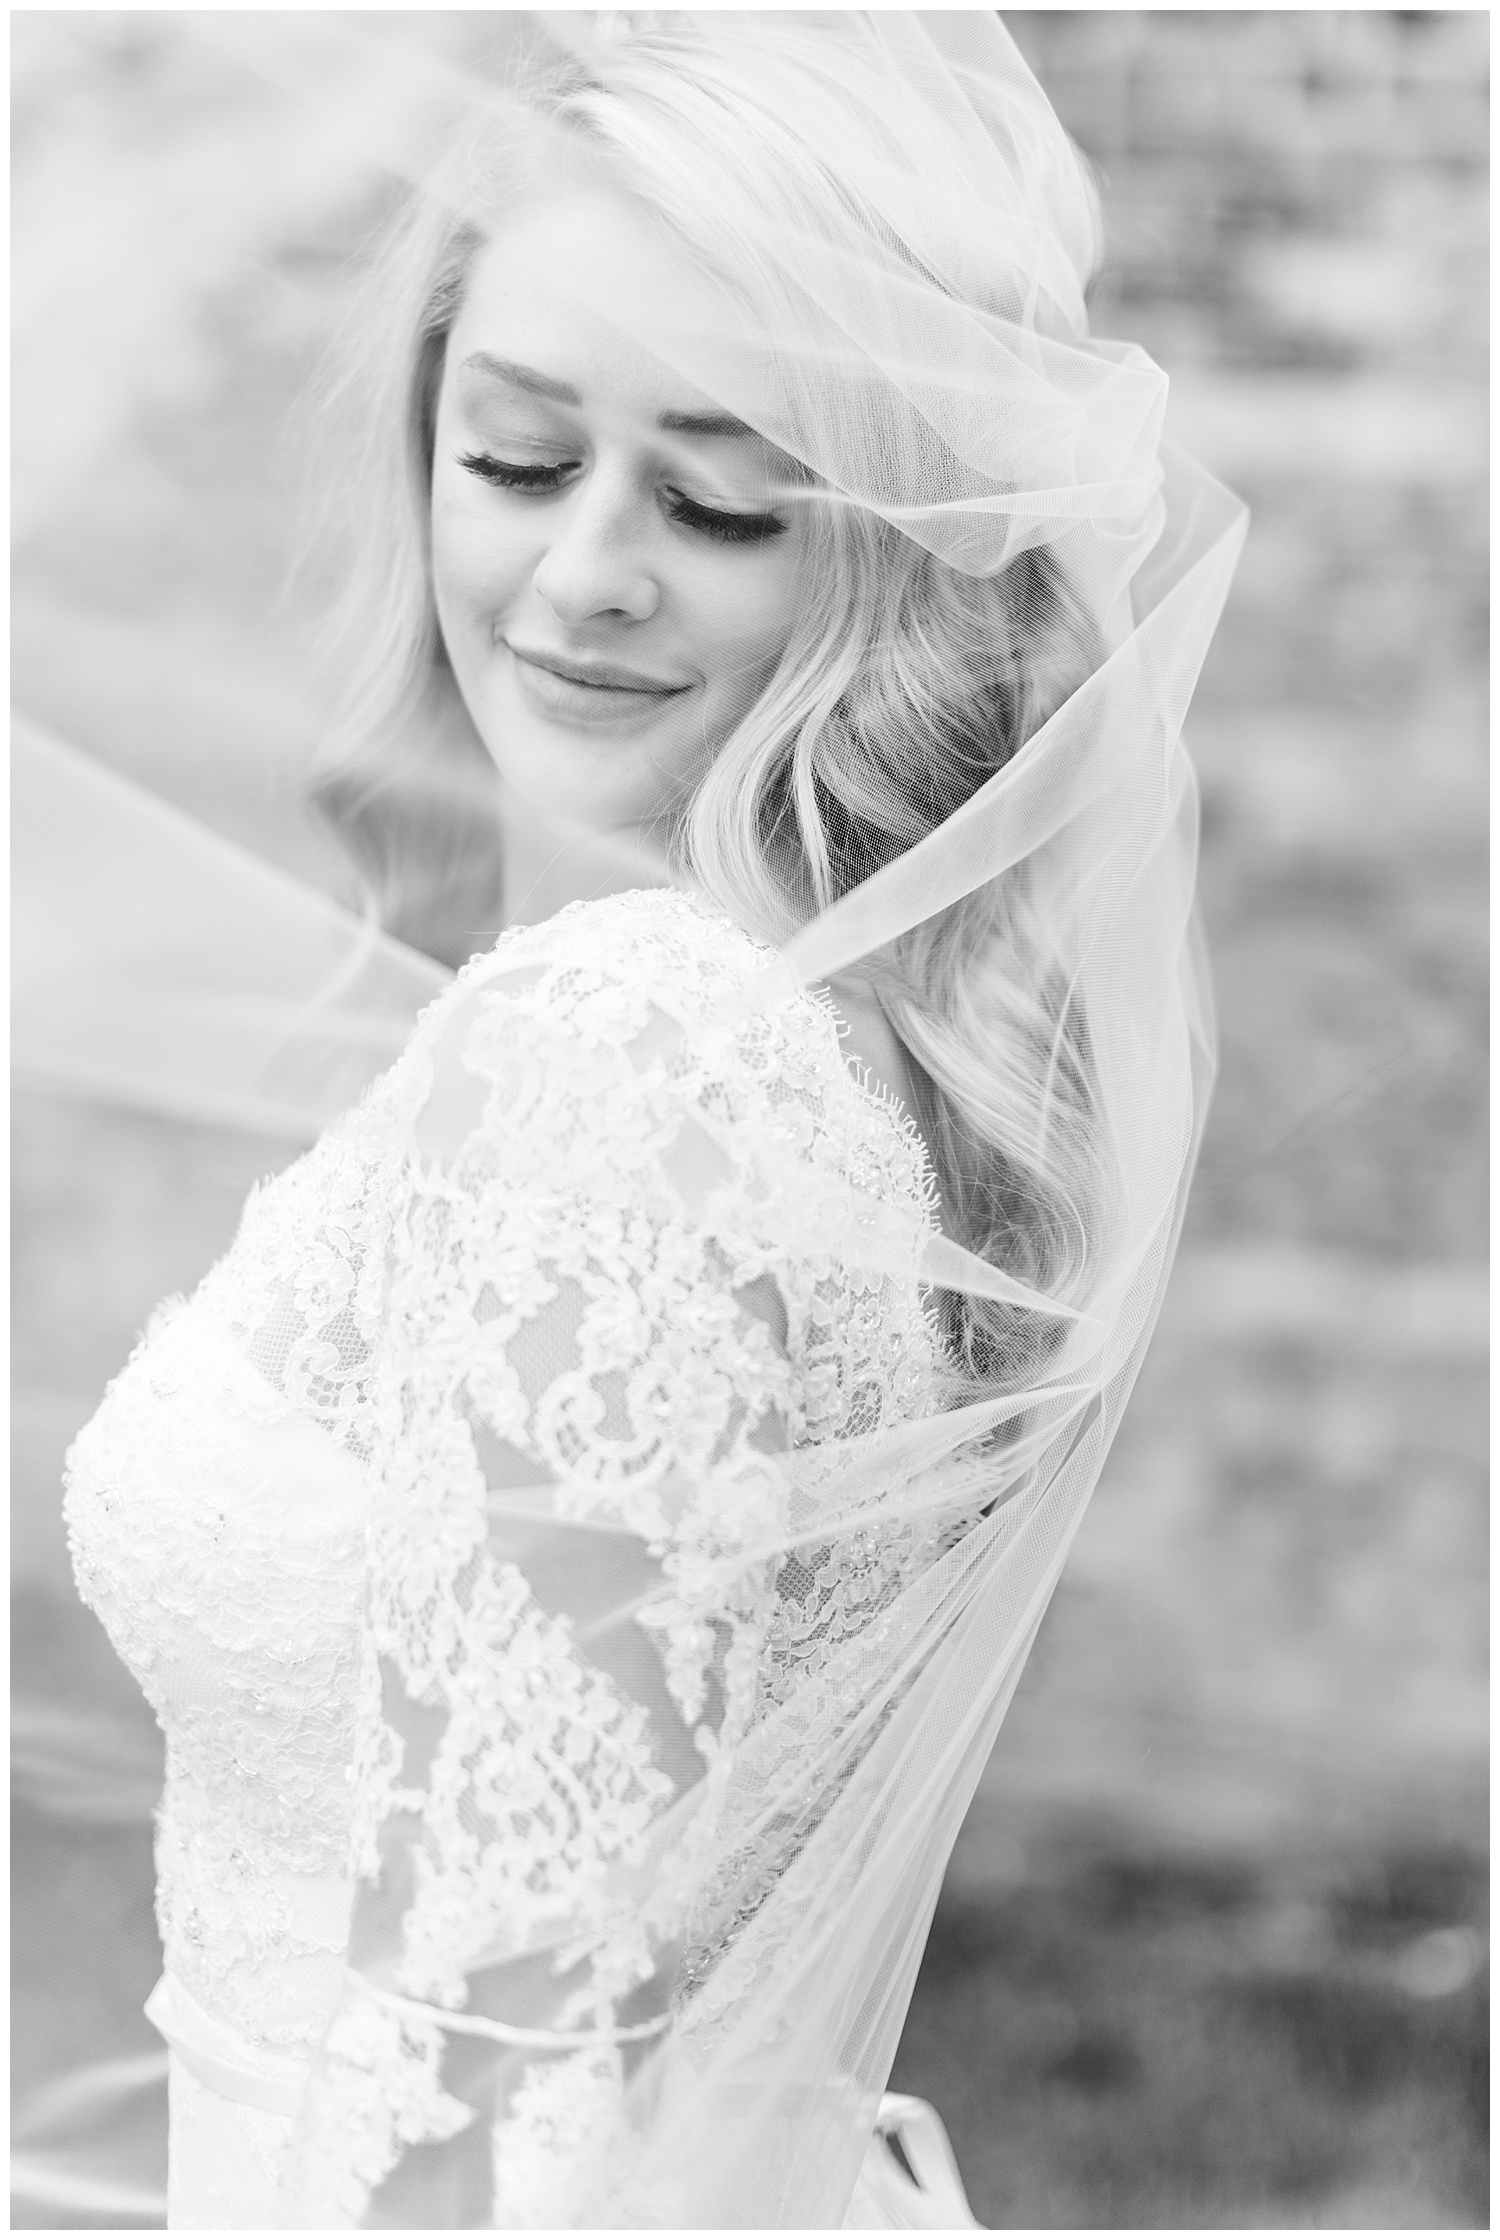 Beautiful bride looks down as her veil blows in the wind | CB Studio